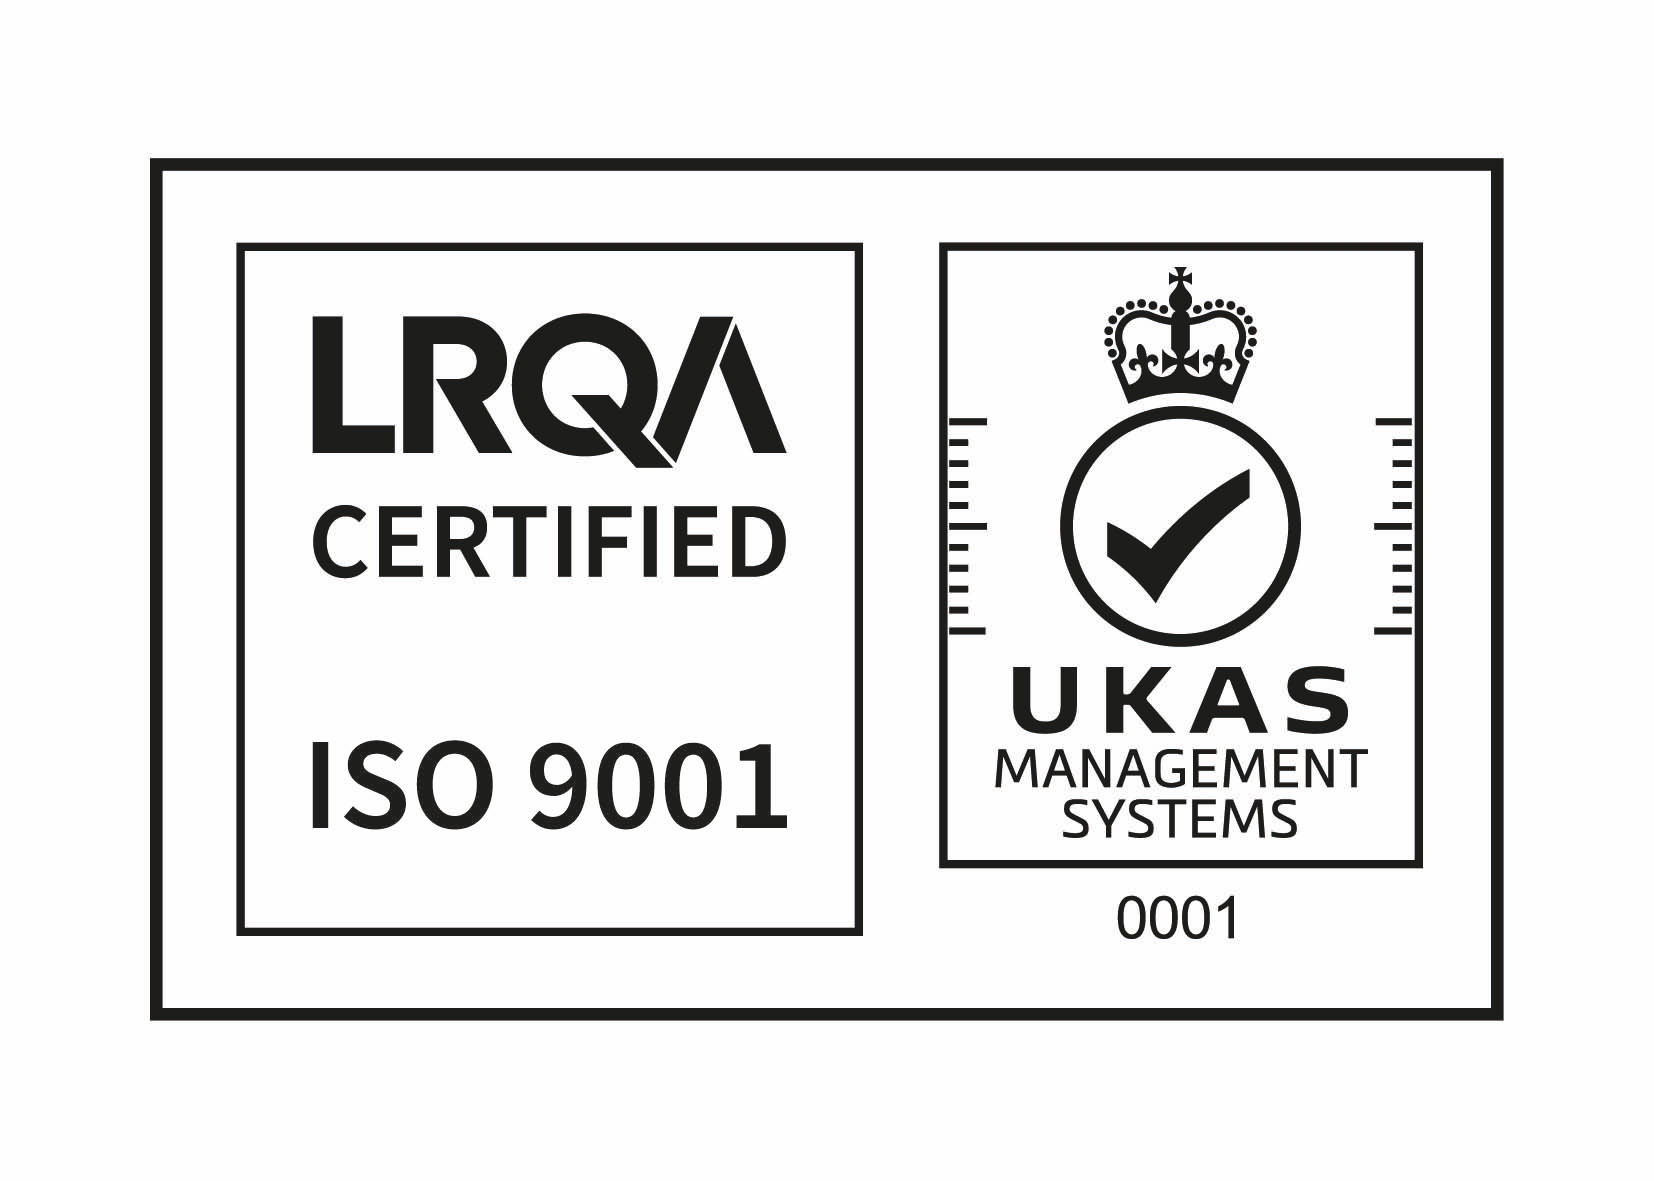 ISO 9001 certification is an external quality standard for professional moving companies